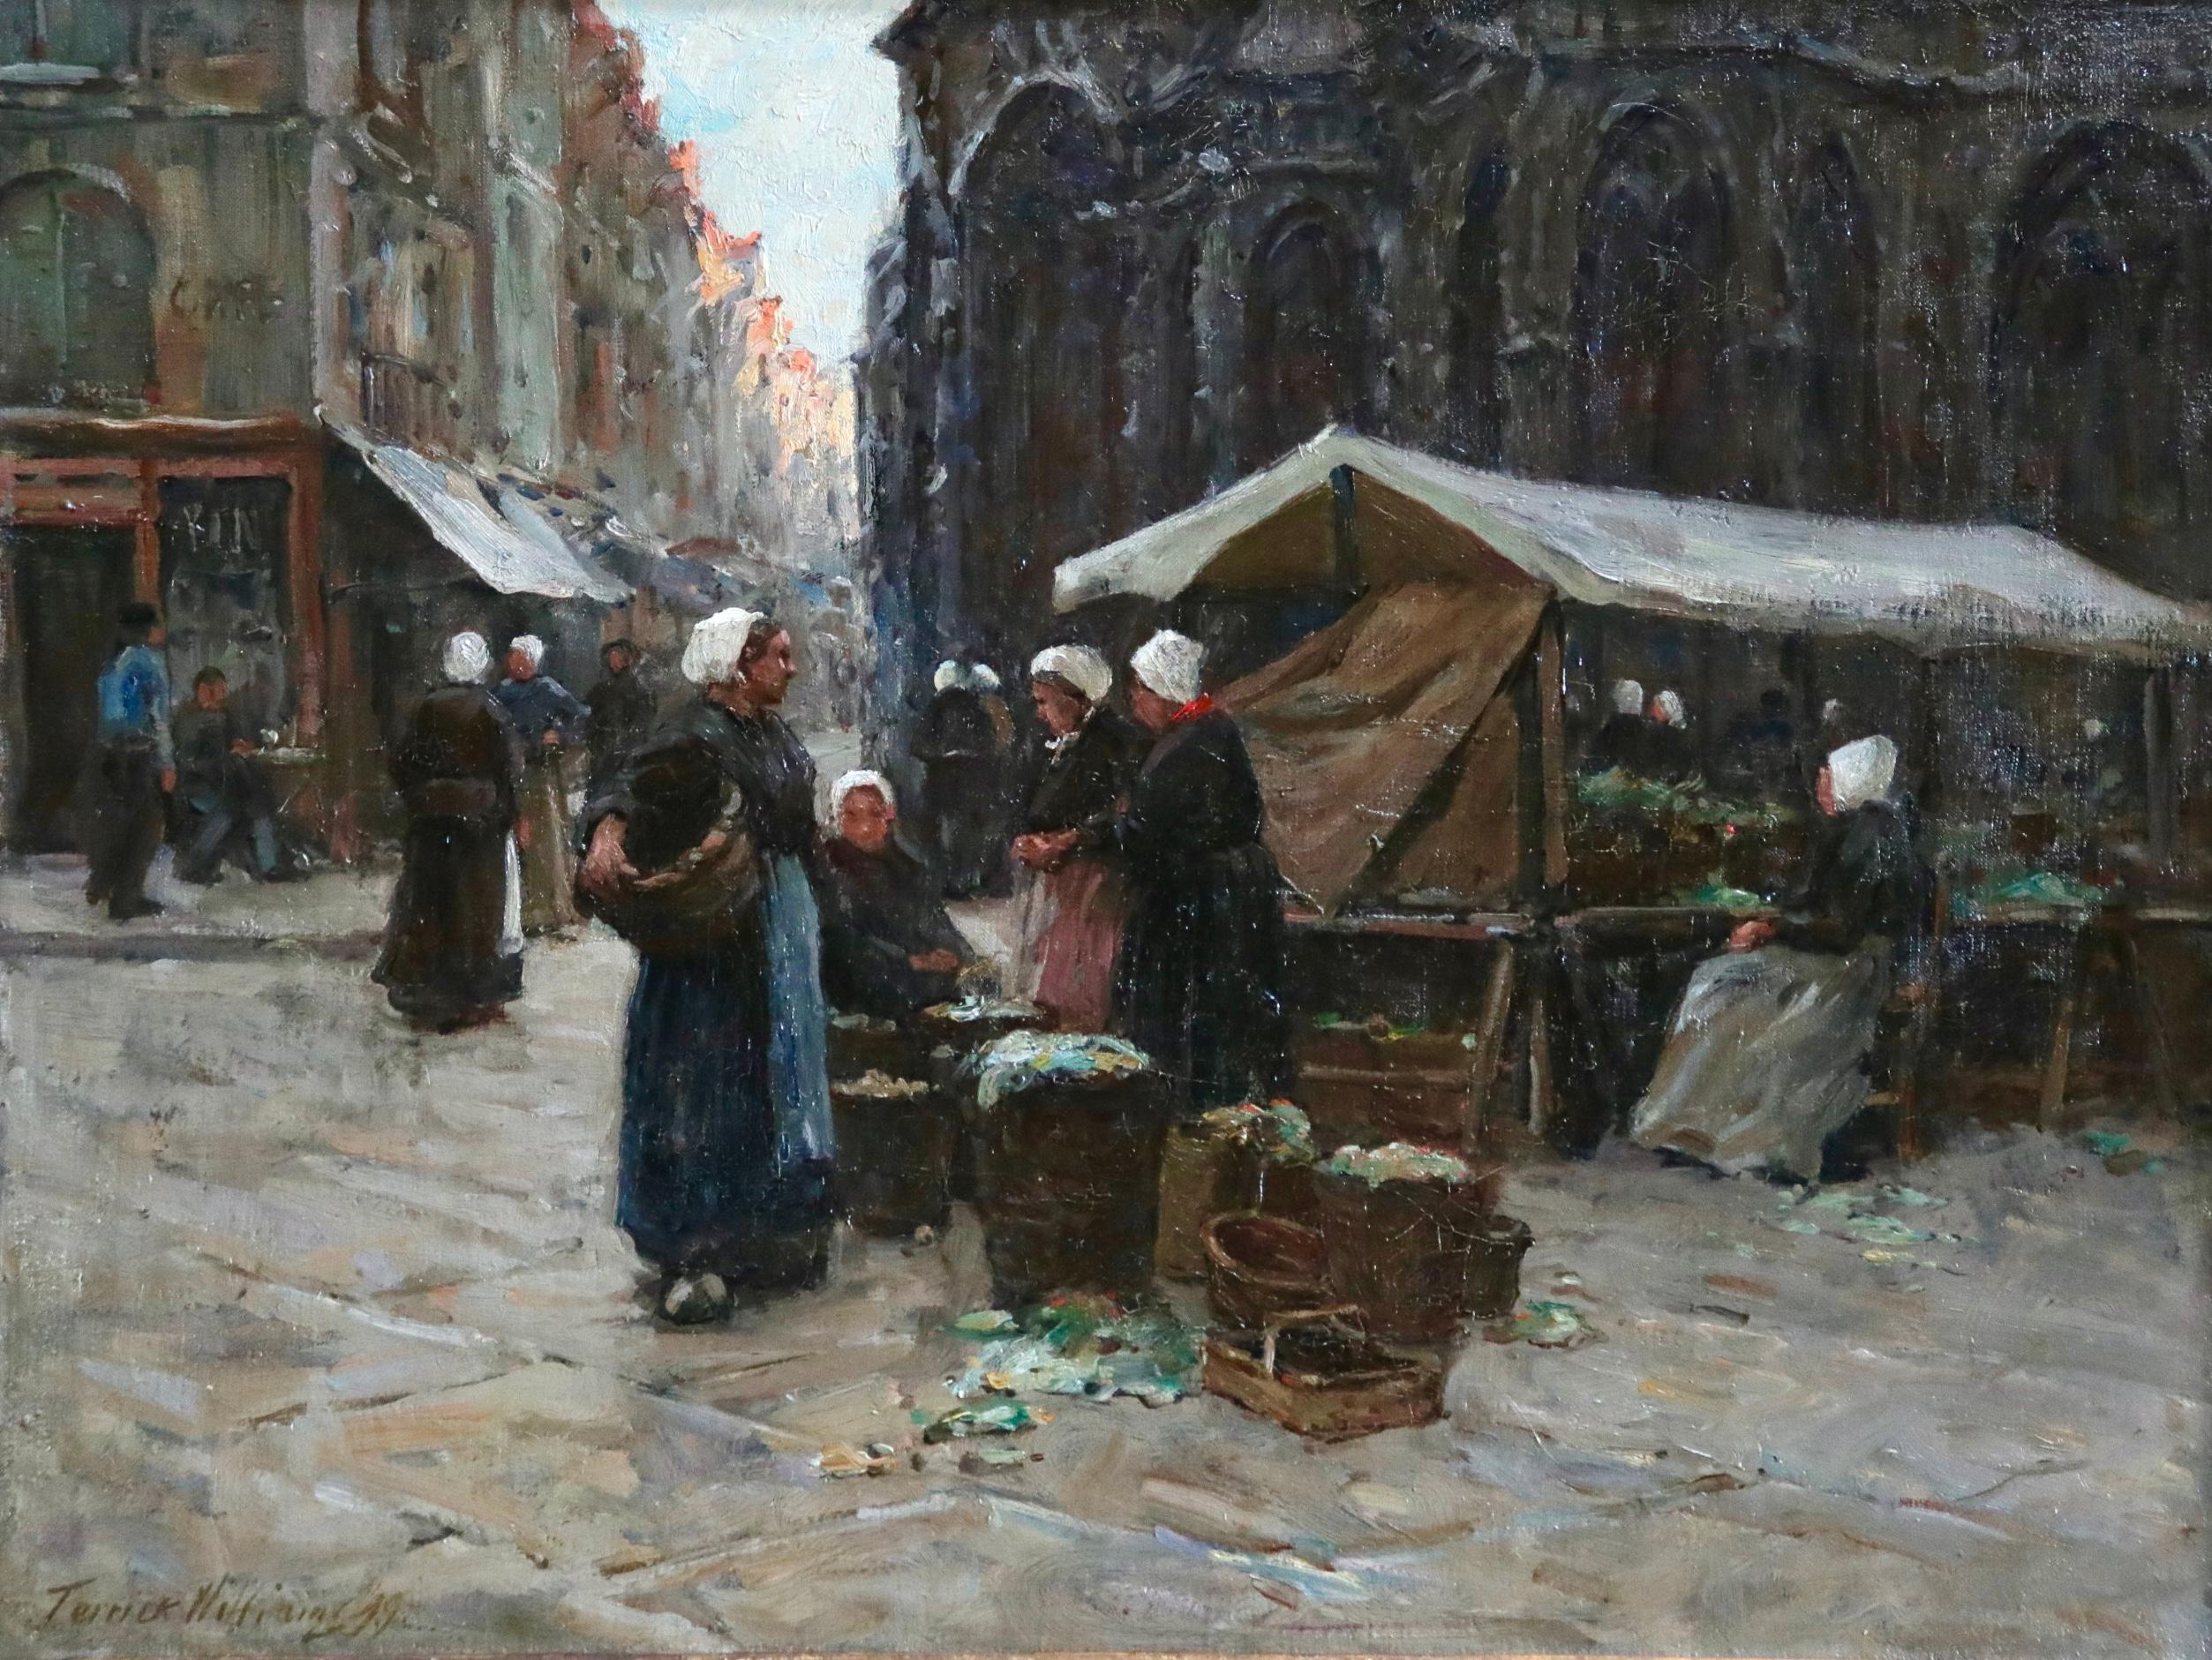 Oil on original canvas by Terrick John Williams depicting women in a market in Dieppe. Signed and dated 1899 lower left and titled verso. Framed dimensions are 24 inches high by 31 inches wide. 

Provenance:
Exhibited at the Royal Academy, London